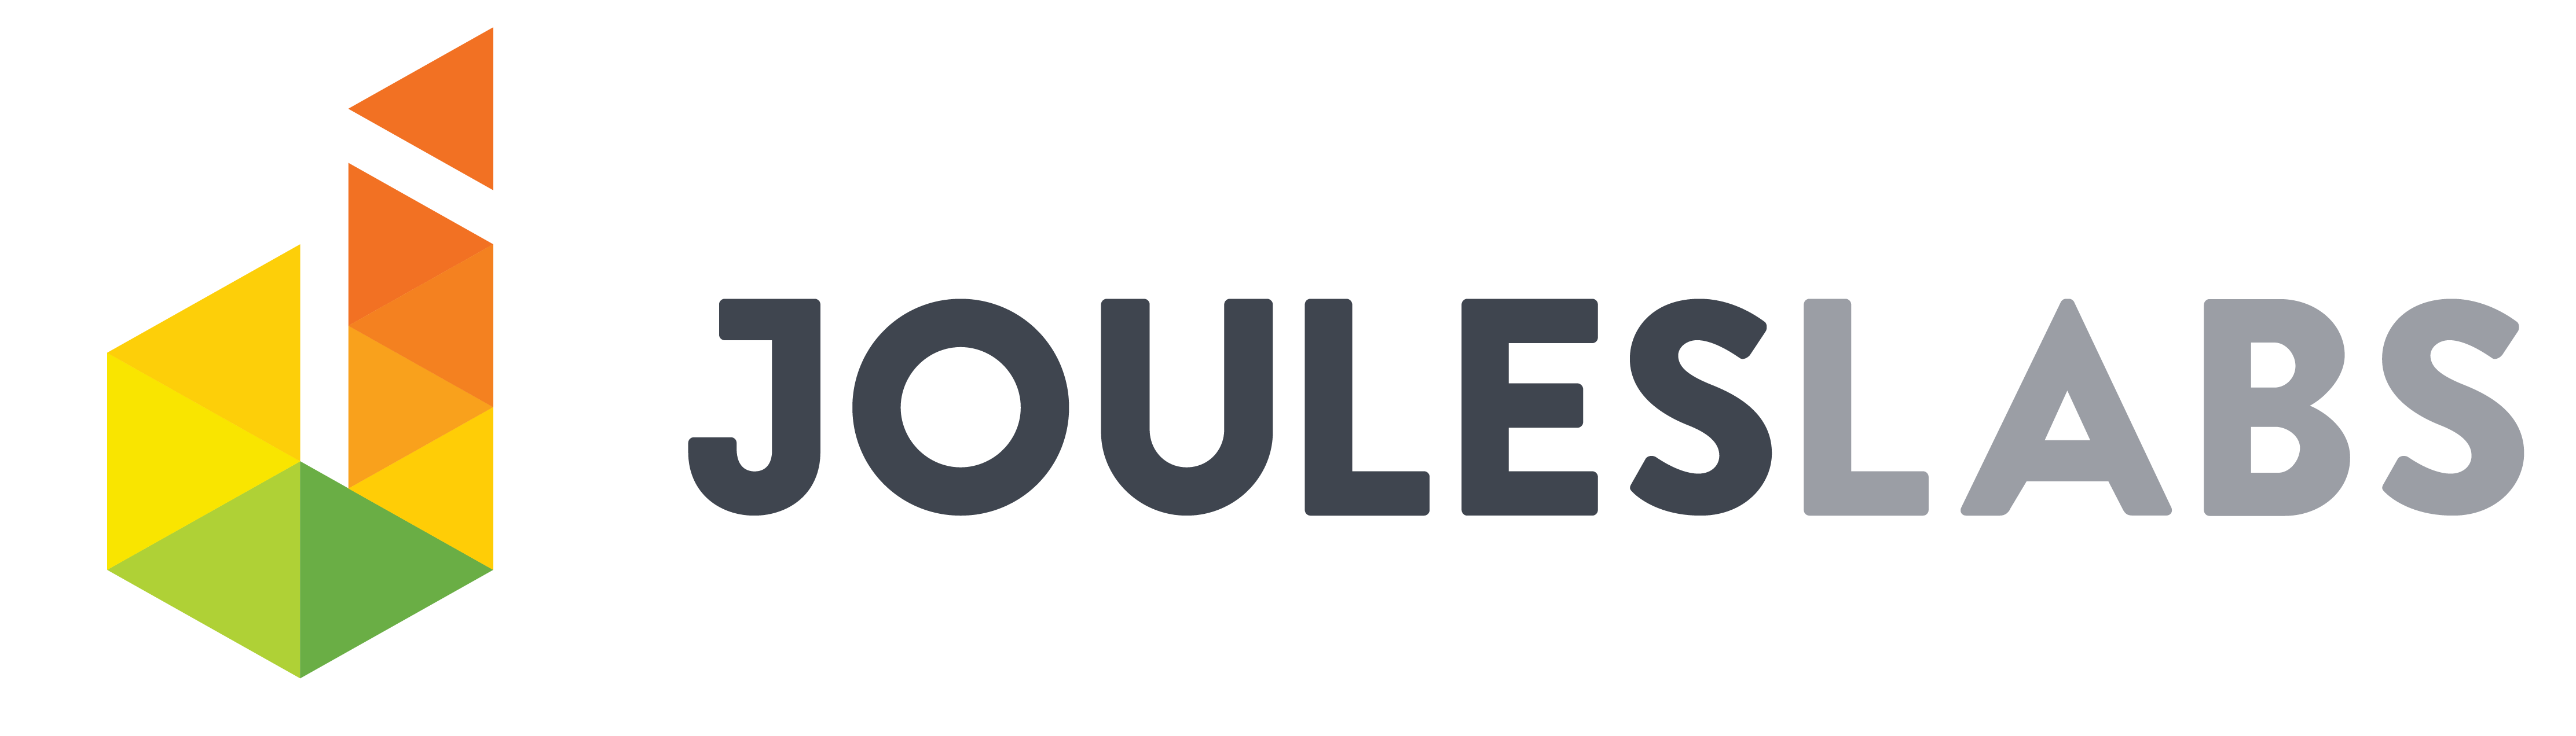 Joules Labs